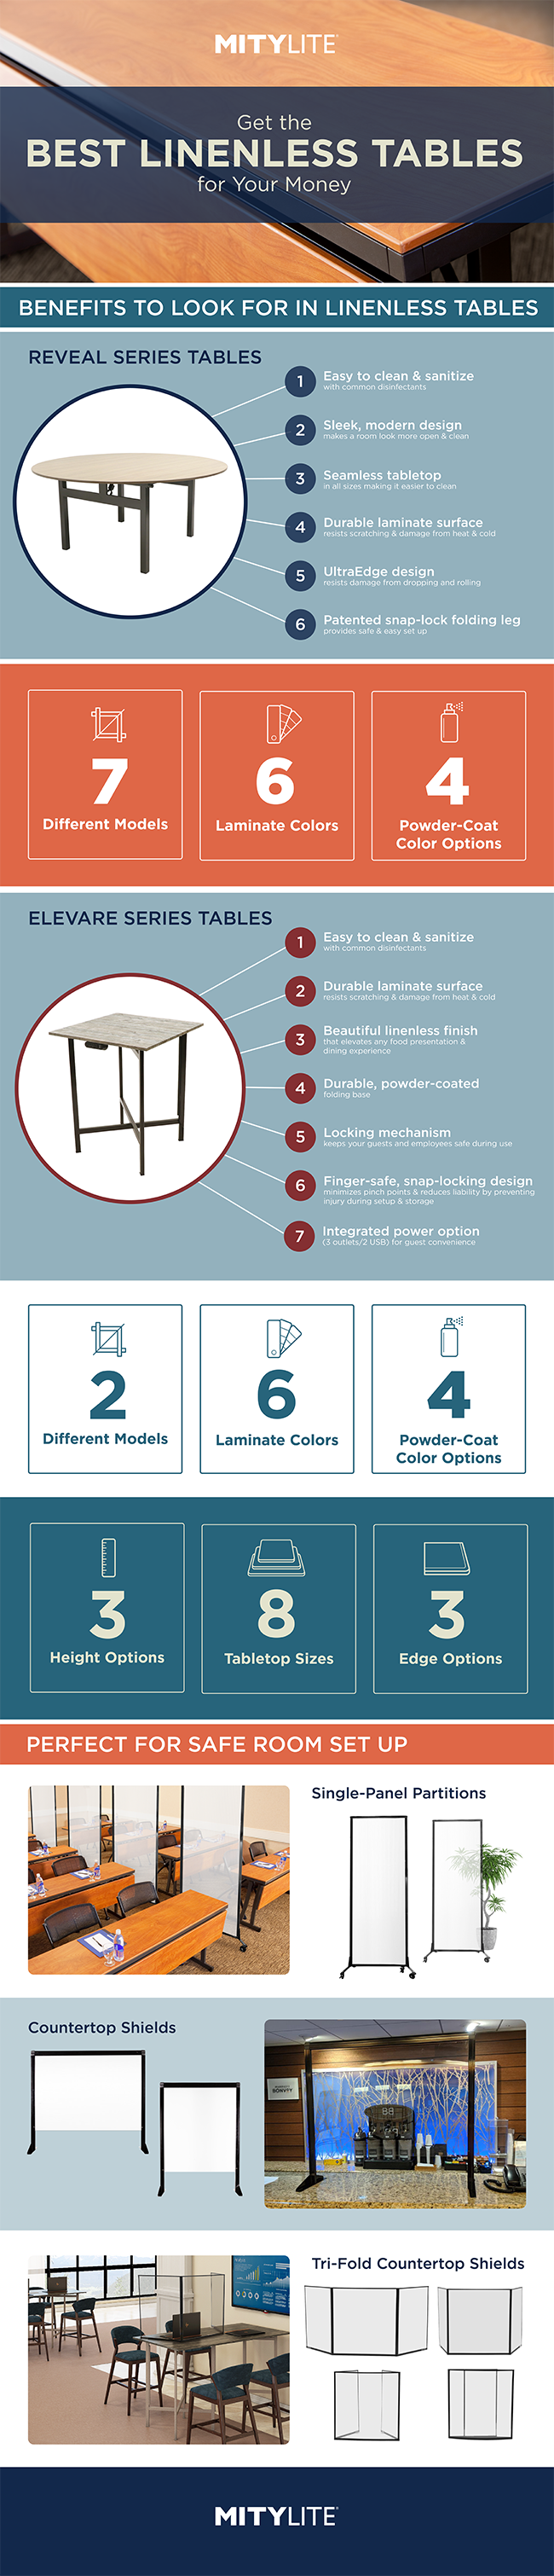 Tall Infographic Image about Tables and Shields